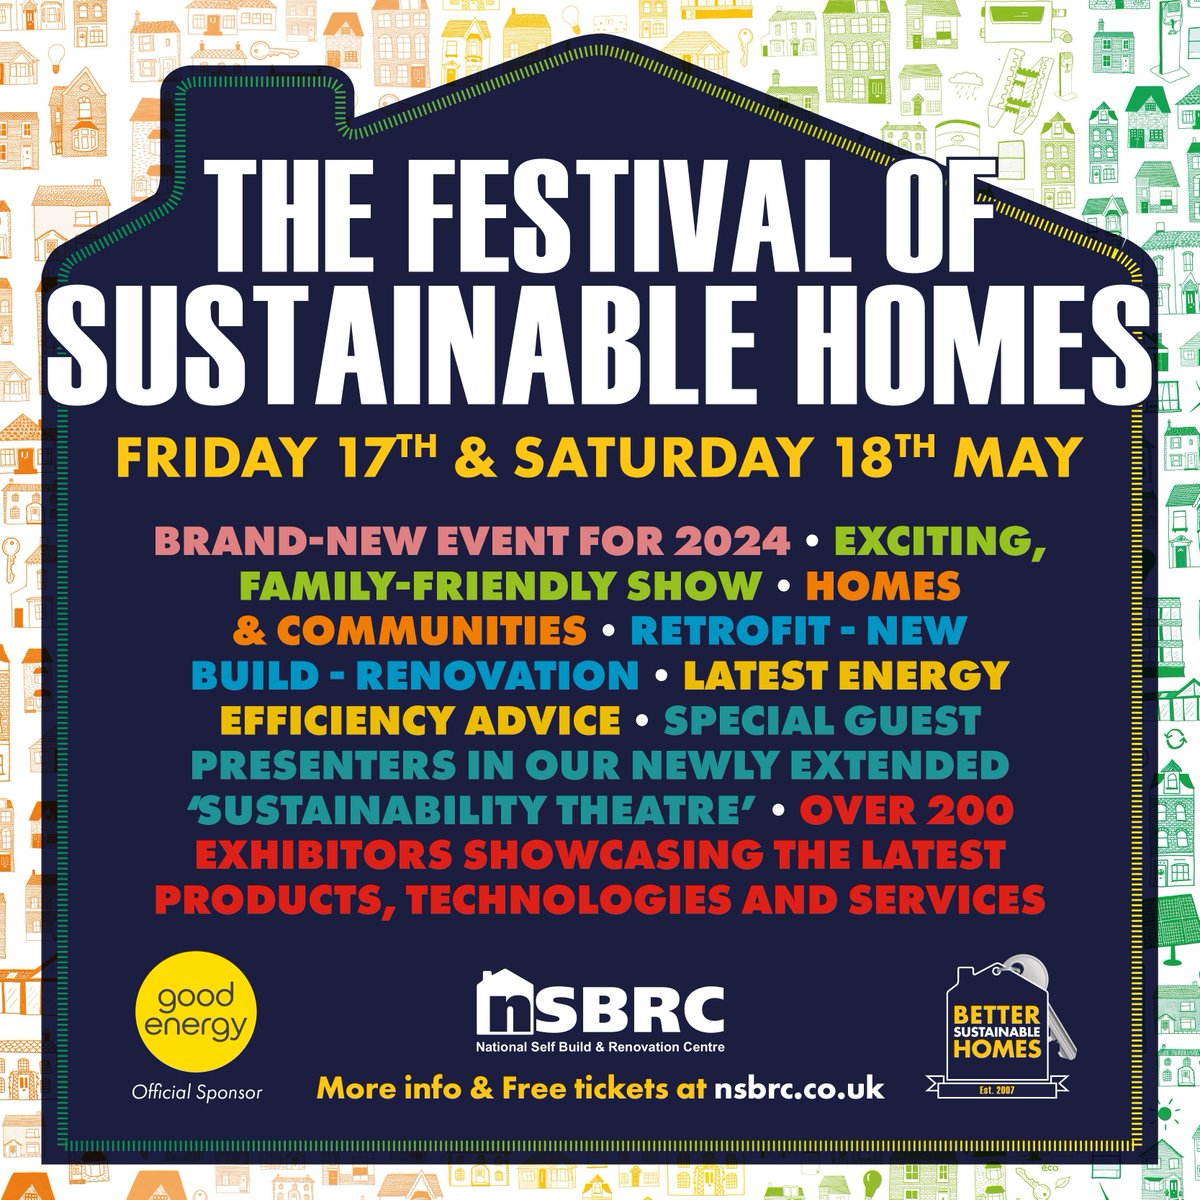 It's time for The Festival of Sustainable Homes at the National Self Build & Renovation Centre in Swindon this weekend! Our team will be there to answer all your eco home questions. Visit our stand, number 63, and say hi! 

@nsbrc #HomebuildingShow #EcoHomes #SustainableHomes